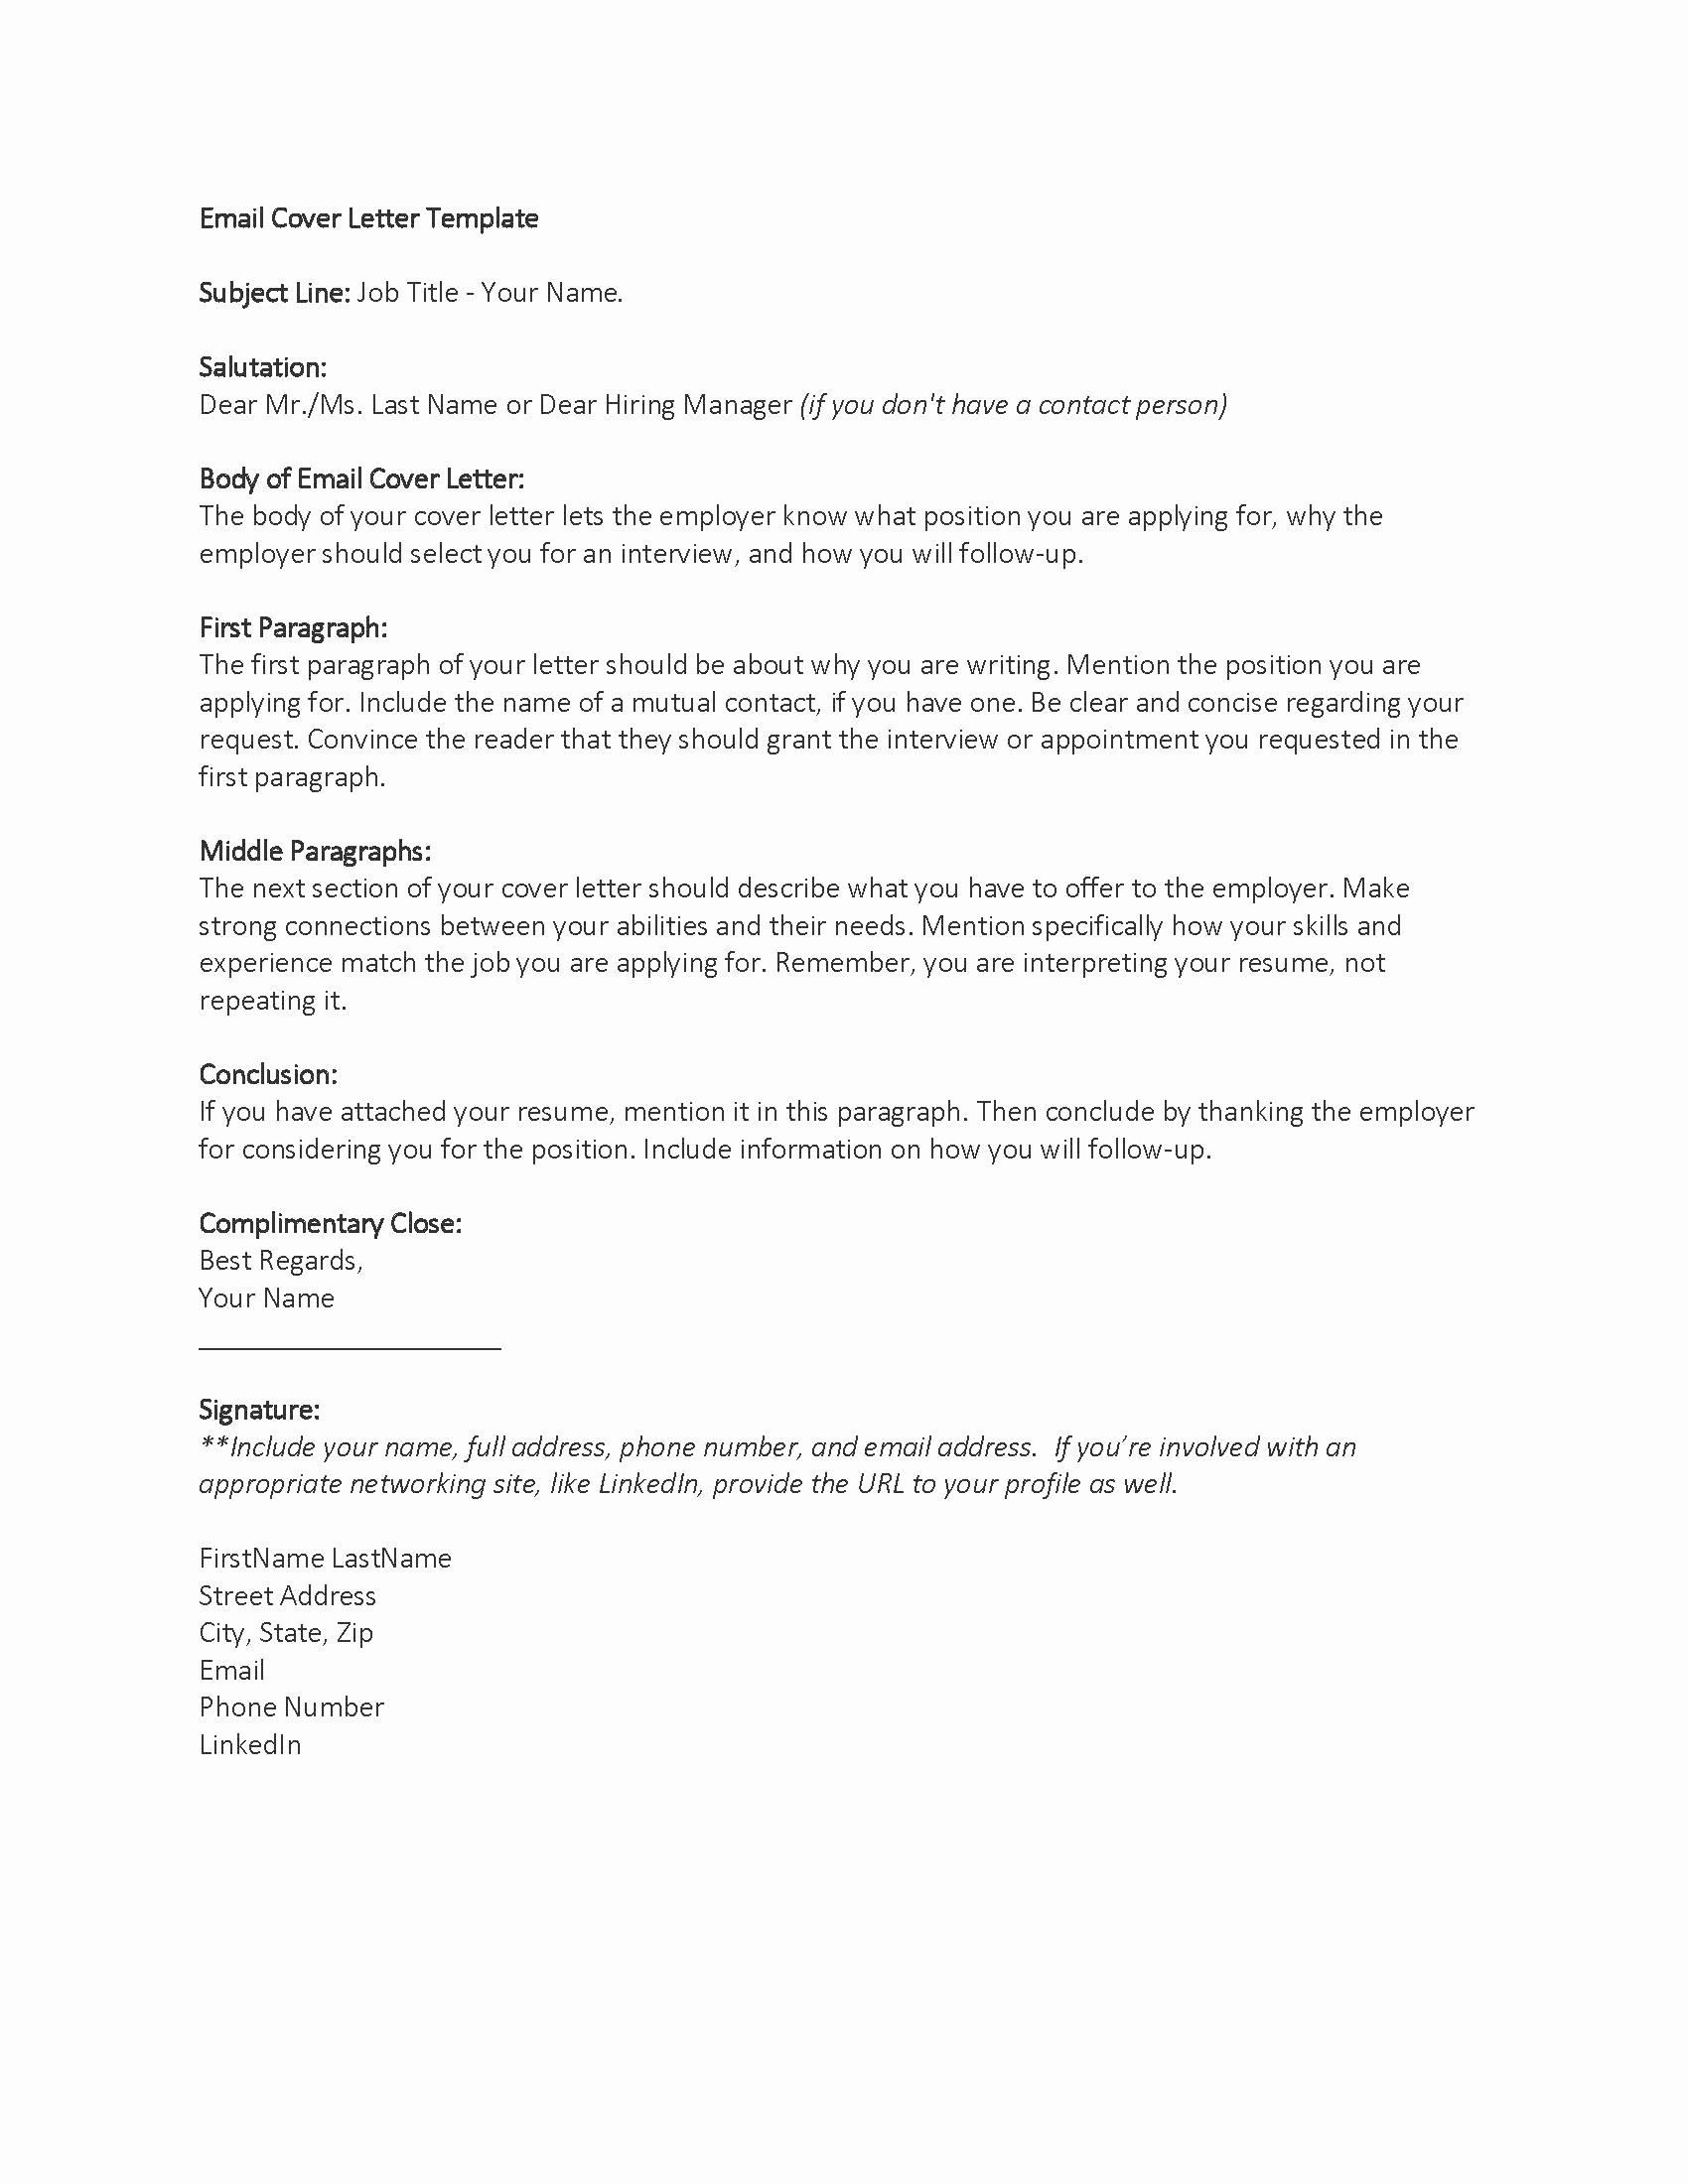 Email Cover Letter Template New Application Letter Sample Cover Letter Template Email